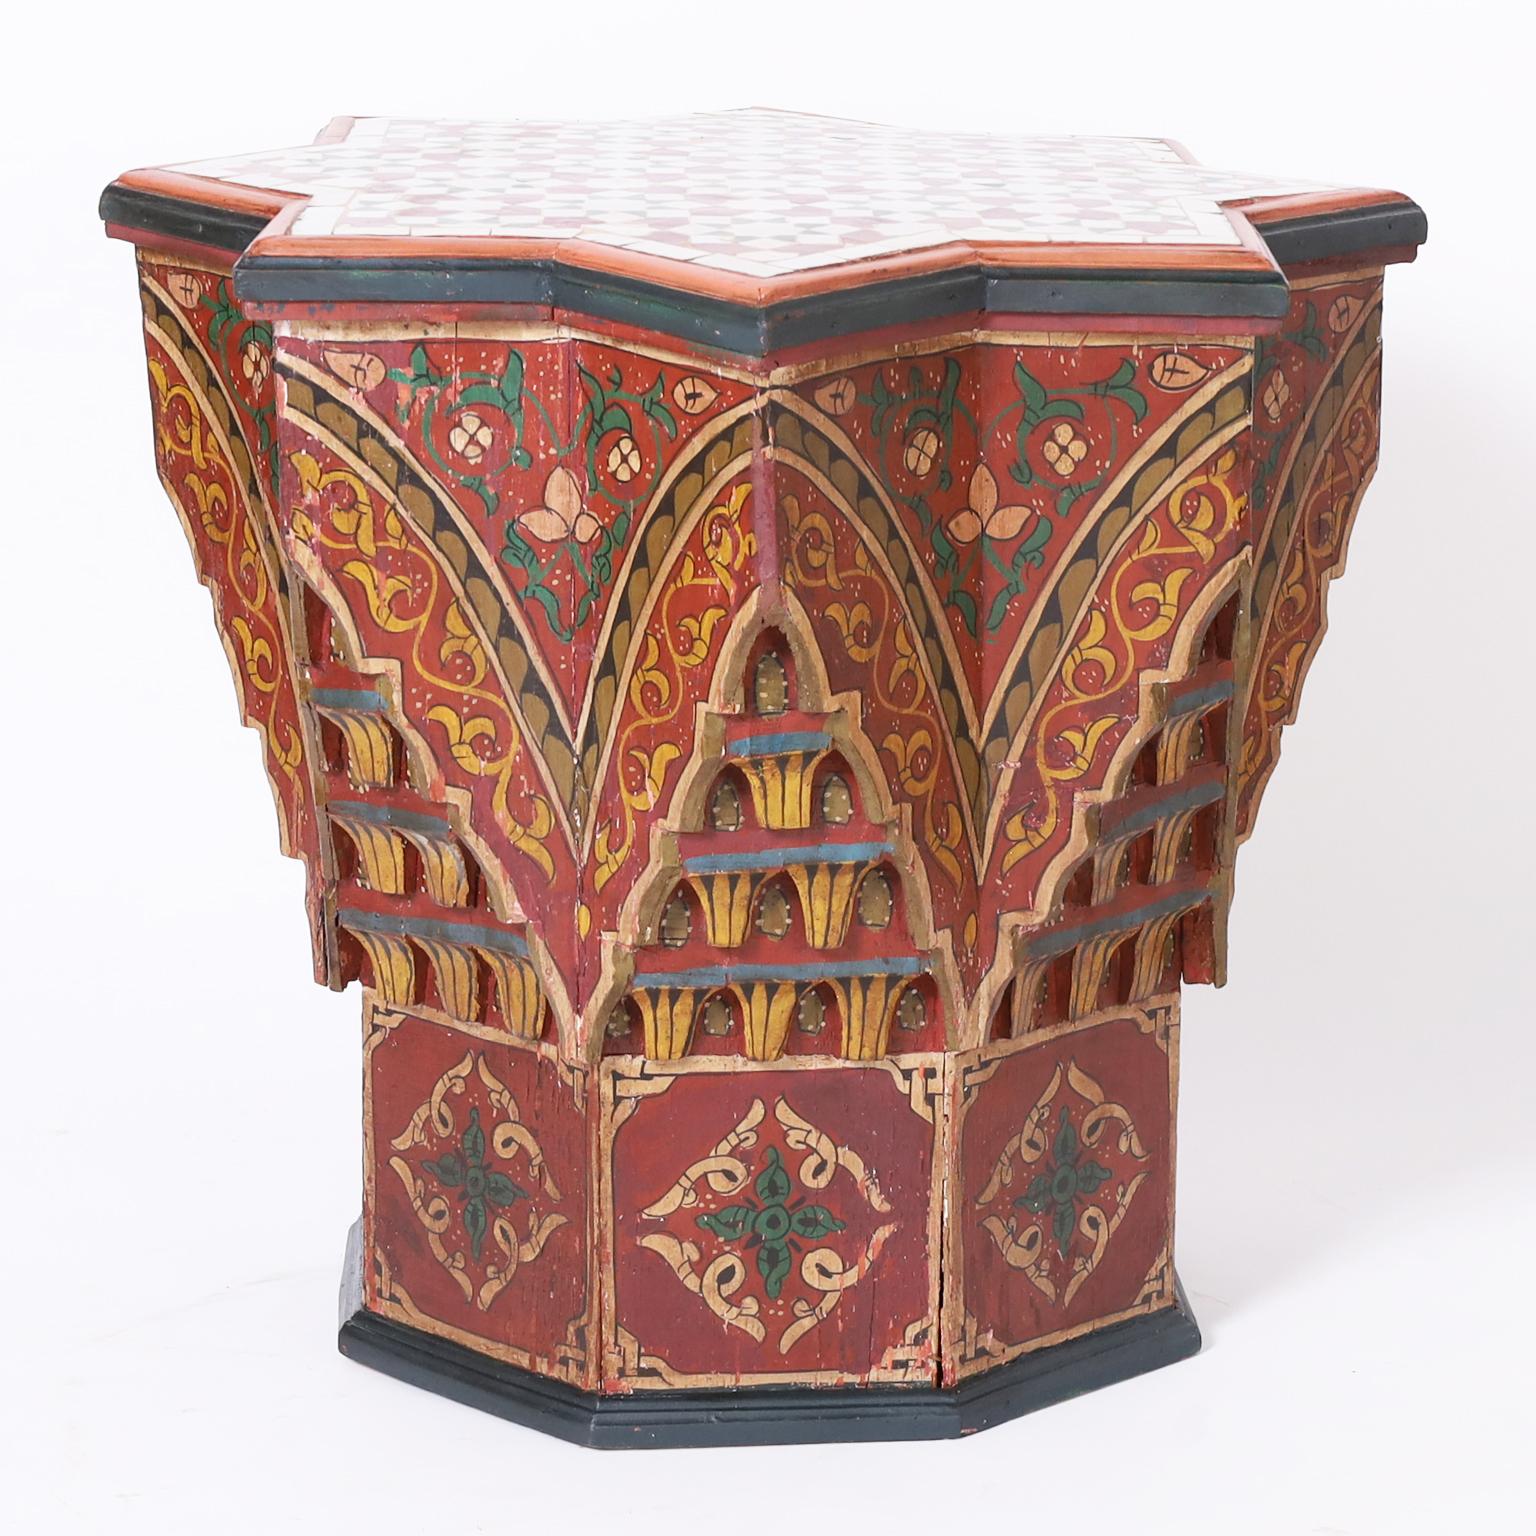 Standout antique Moroccan stand with a star form tiled top over a base paint decorated in distinctive muted mediterranean colors on an octagon form with architectural elements. 